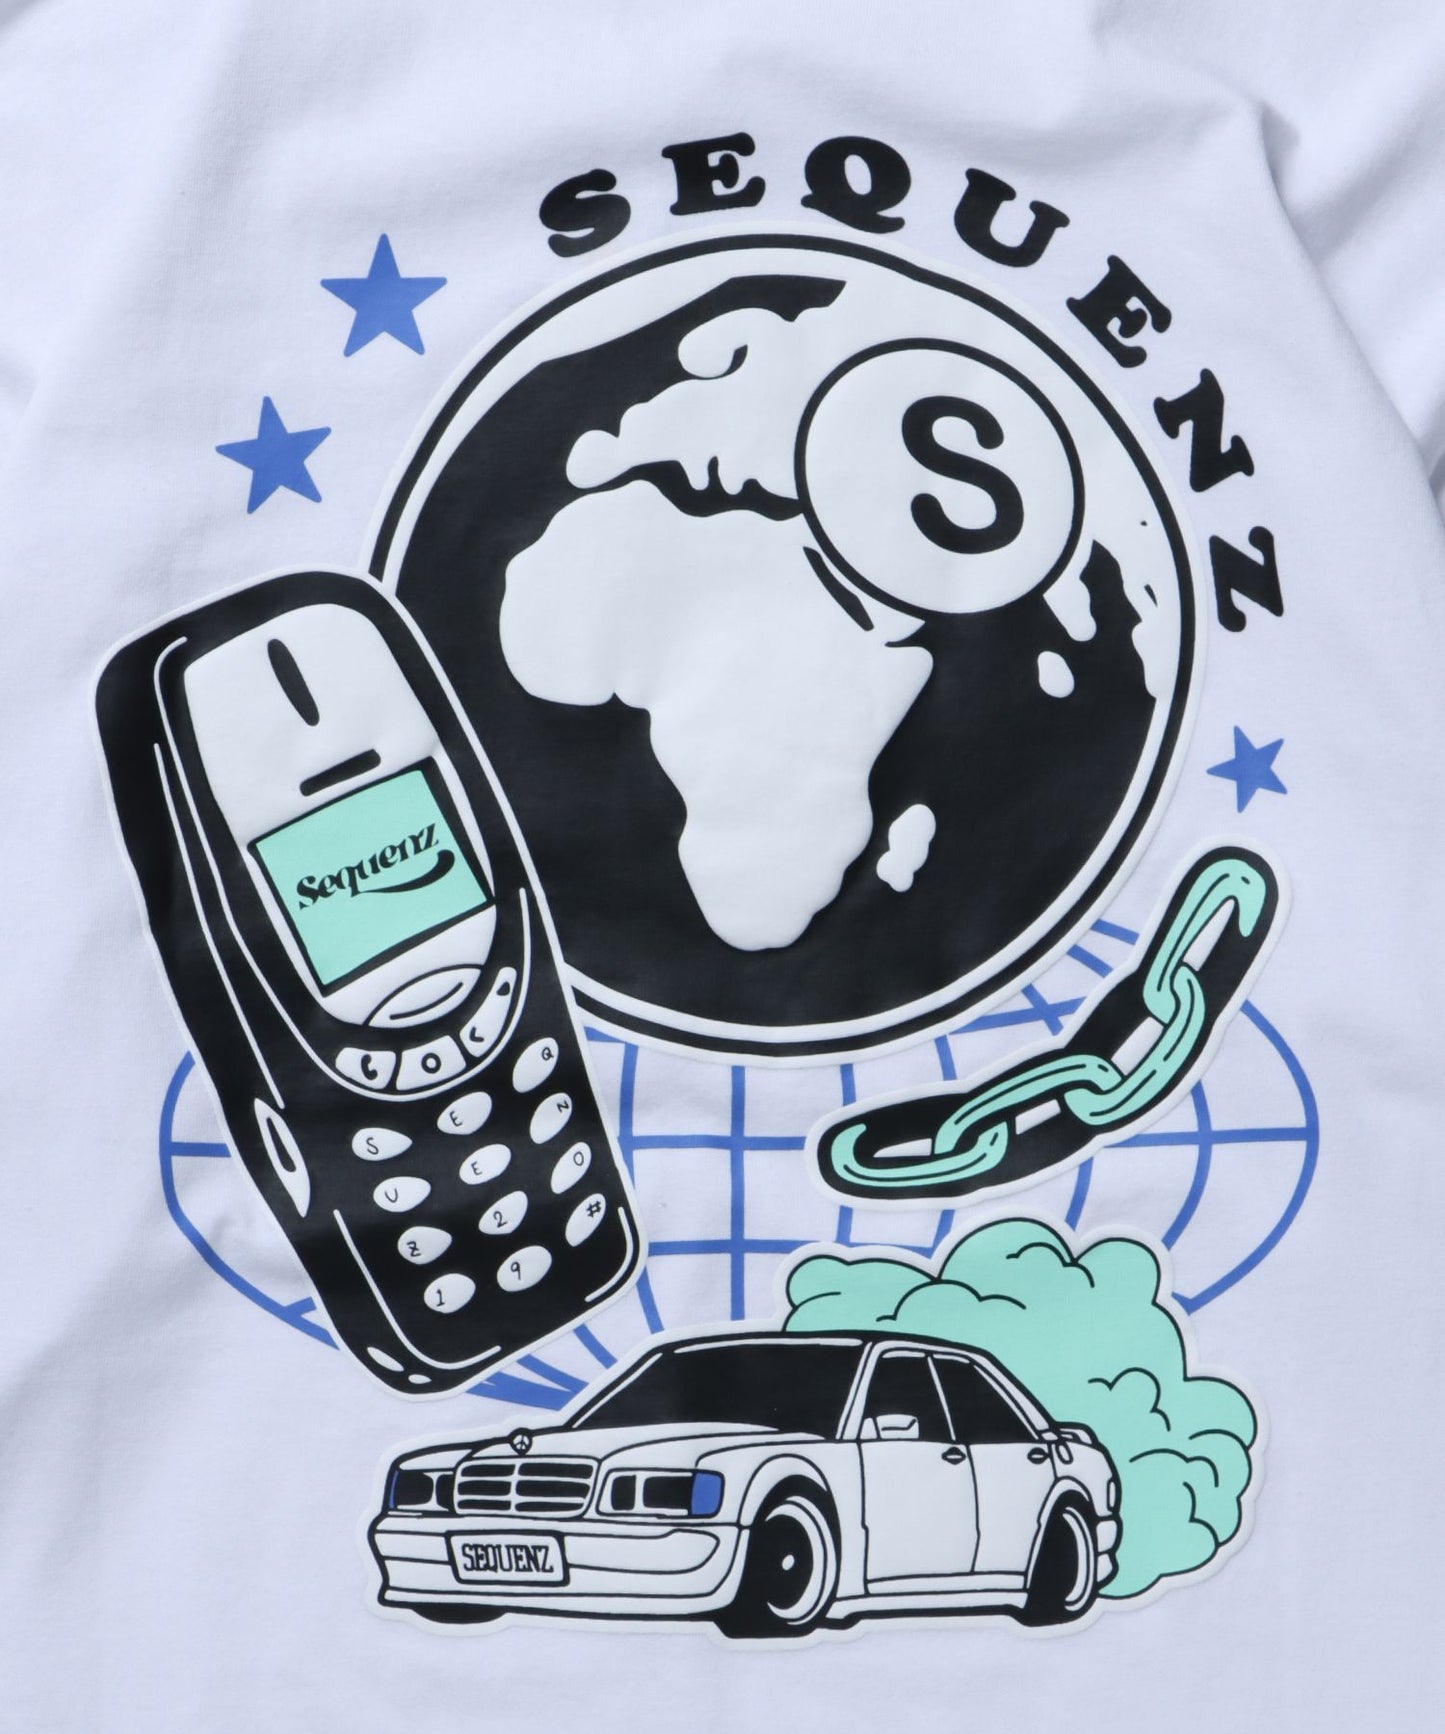 【SEQUENZ】 "EMOTIONAL"L/S TEE/ ８ボール プリント ロンT ビックサイズ 長袖 Tシャツ ホワイト